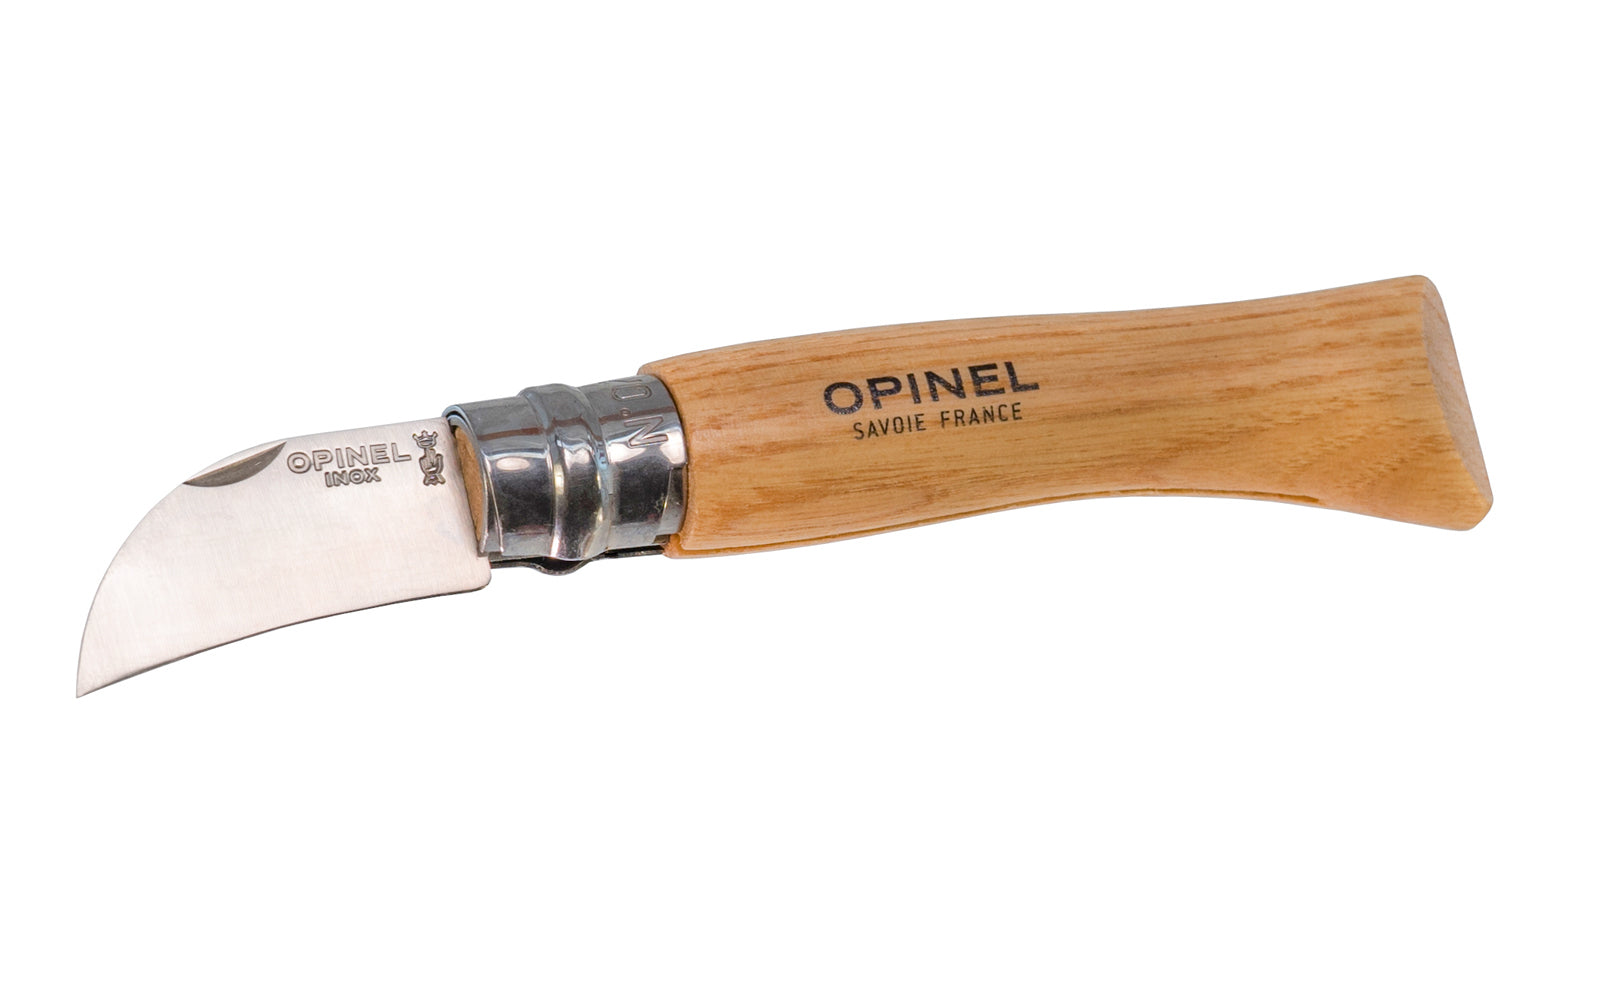 Made in France · Stainless Steel Chestnut & Garlic Knife. This Opinel No. 7 stainless knife is curved & pointed to easily pierce & peel chestnuts & garlic cloves, & can quickly stone fruits such as apricots or plums, etc. The folding knife is also a good tool for whittling wood. 2" long blade. 